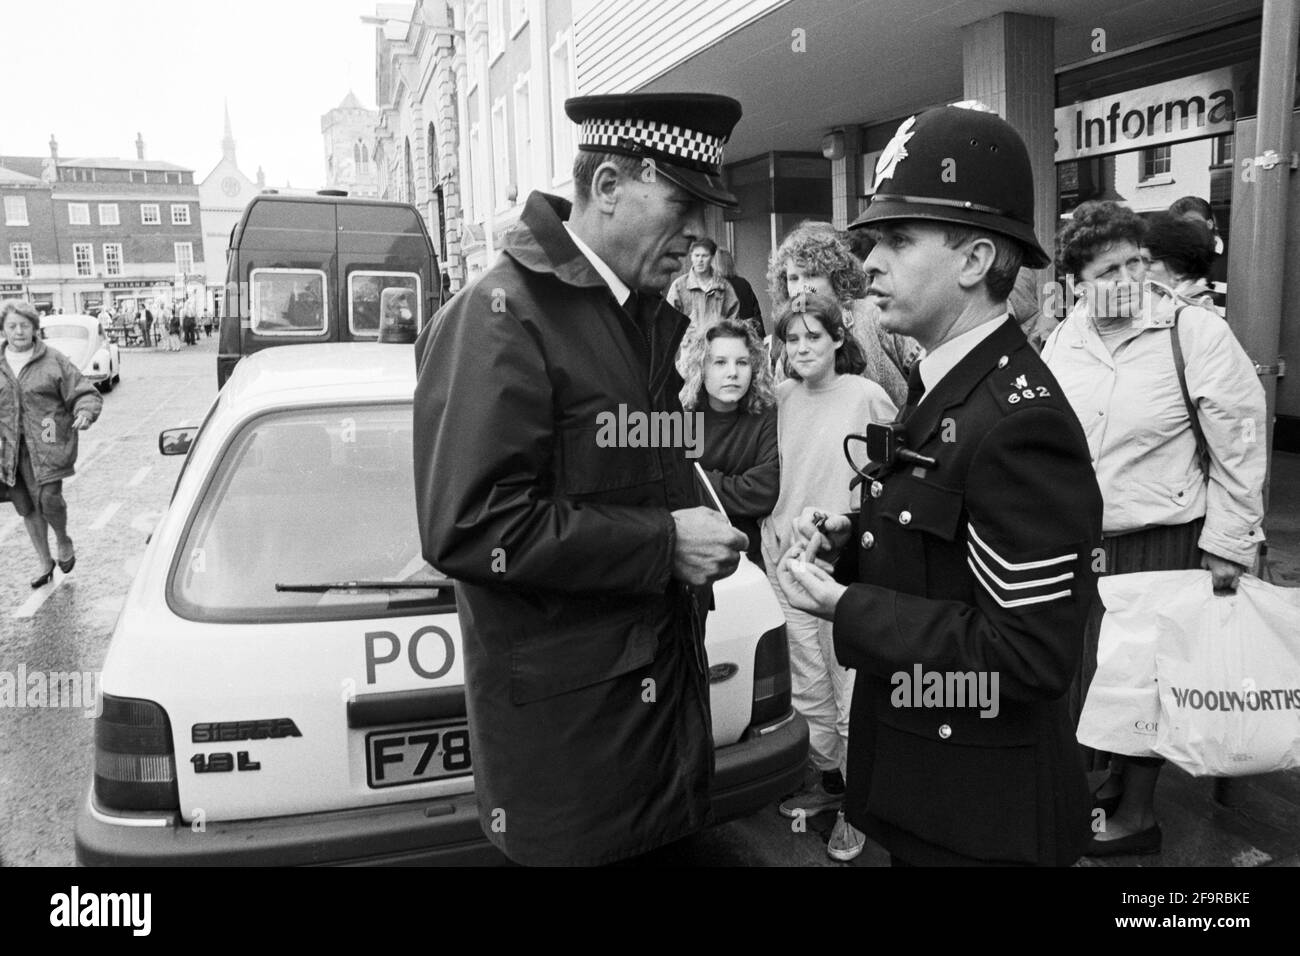 Policing in the 1990s. A Sergeant and his Inspector discus events in Castle Street Salisbury in 1990. Stock Photo